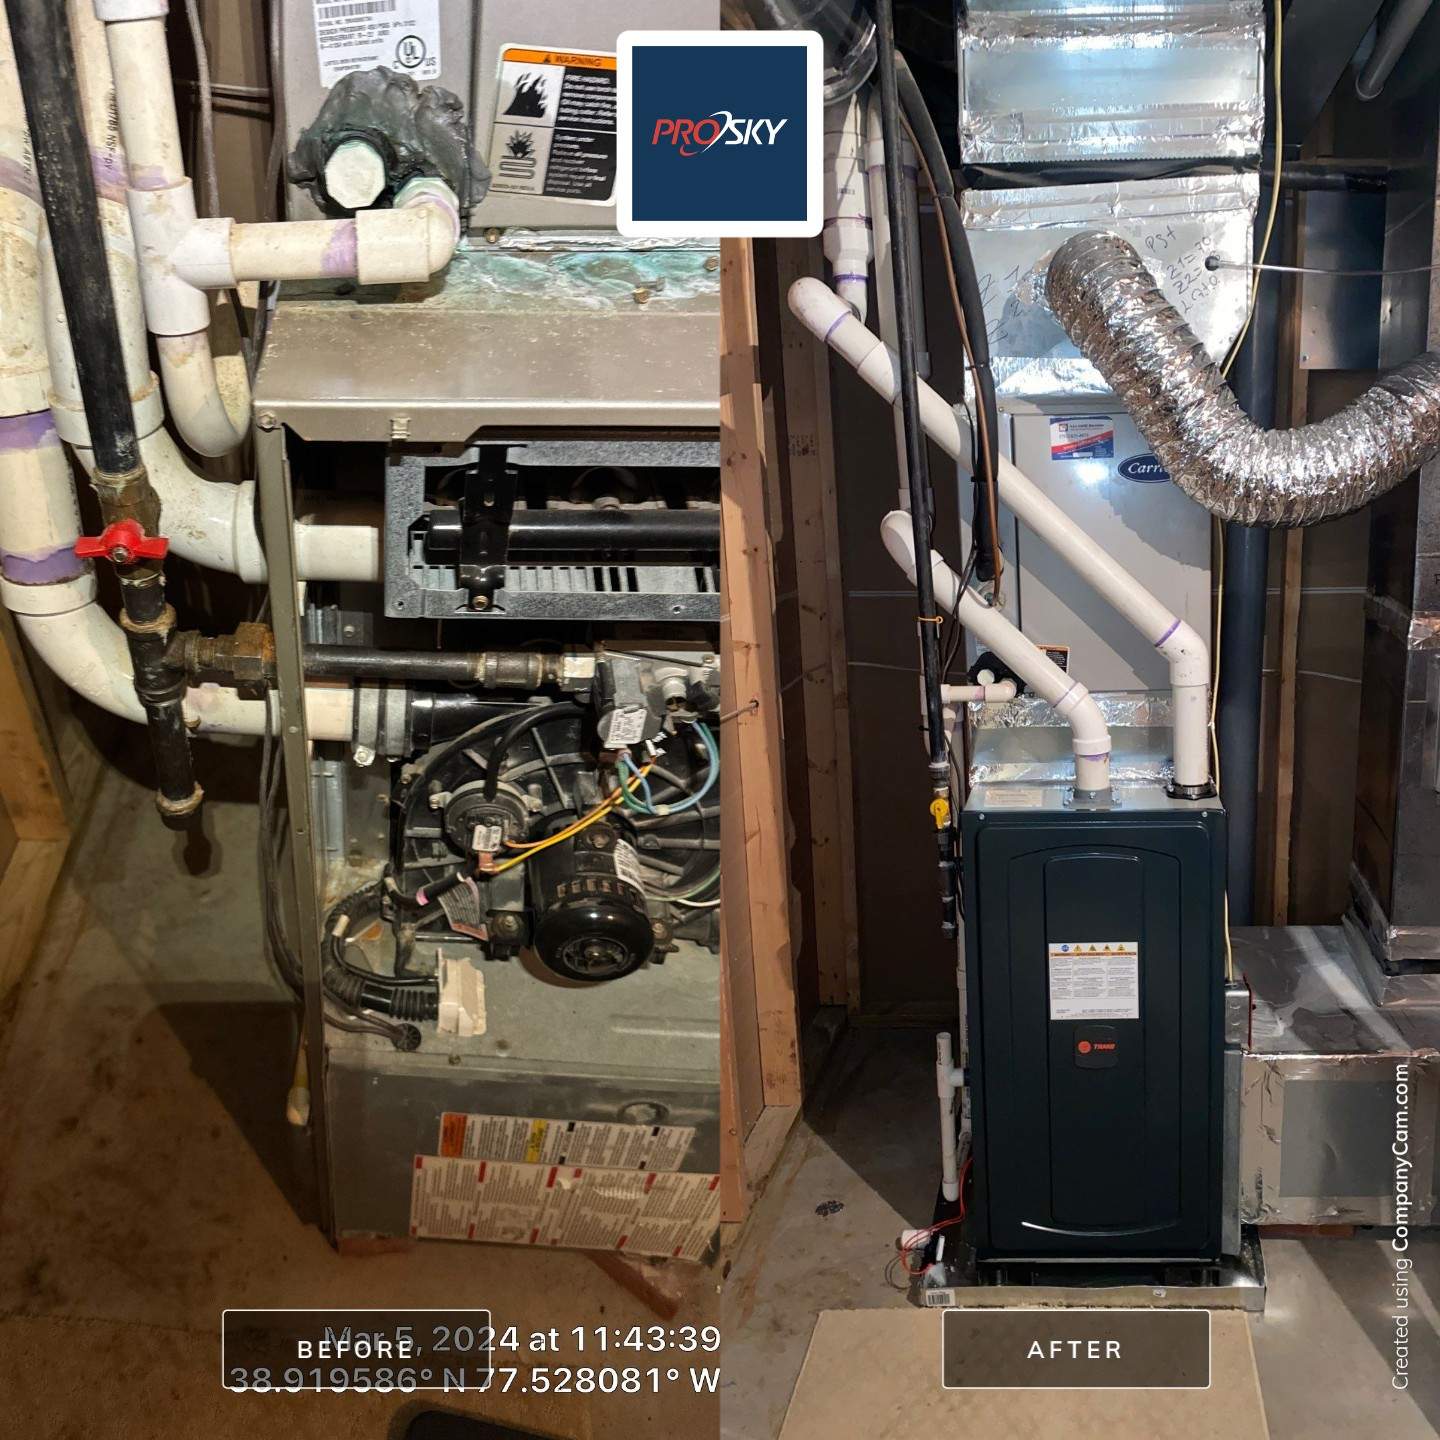 South Riding Gas Furnace Replacement for Safety, Efficiency, and Rebates